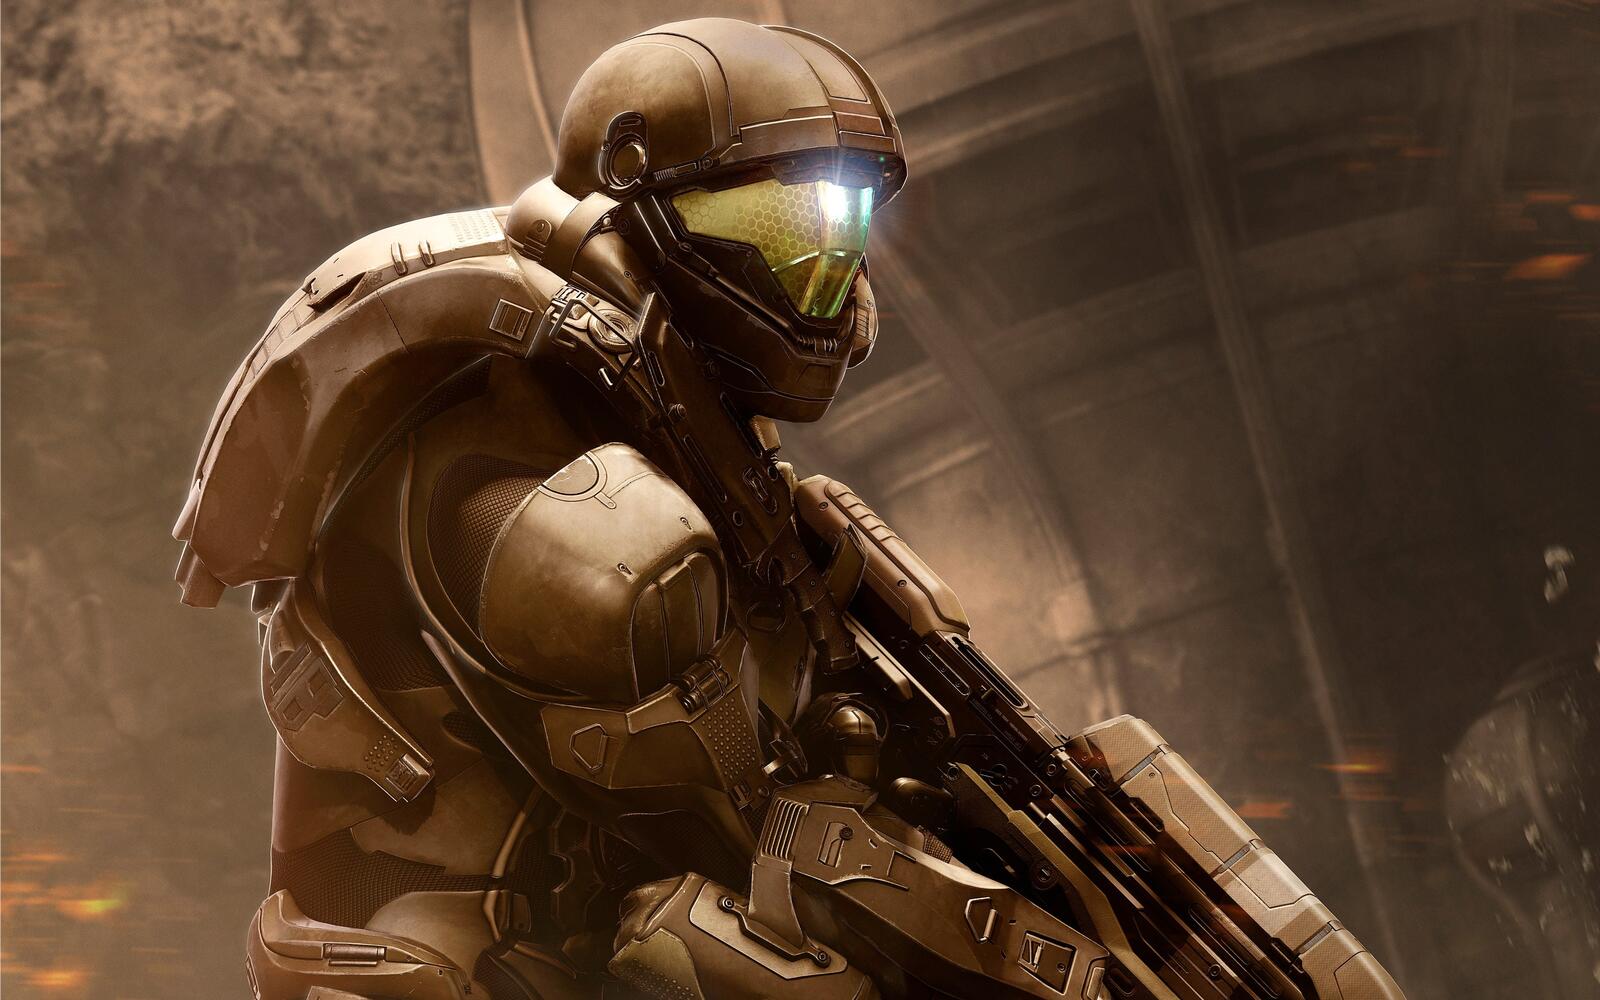 Wallpapers games Halo 5 soldiers on the desktop